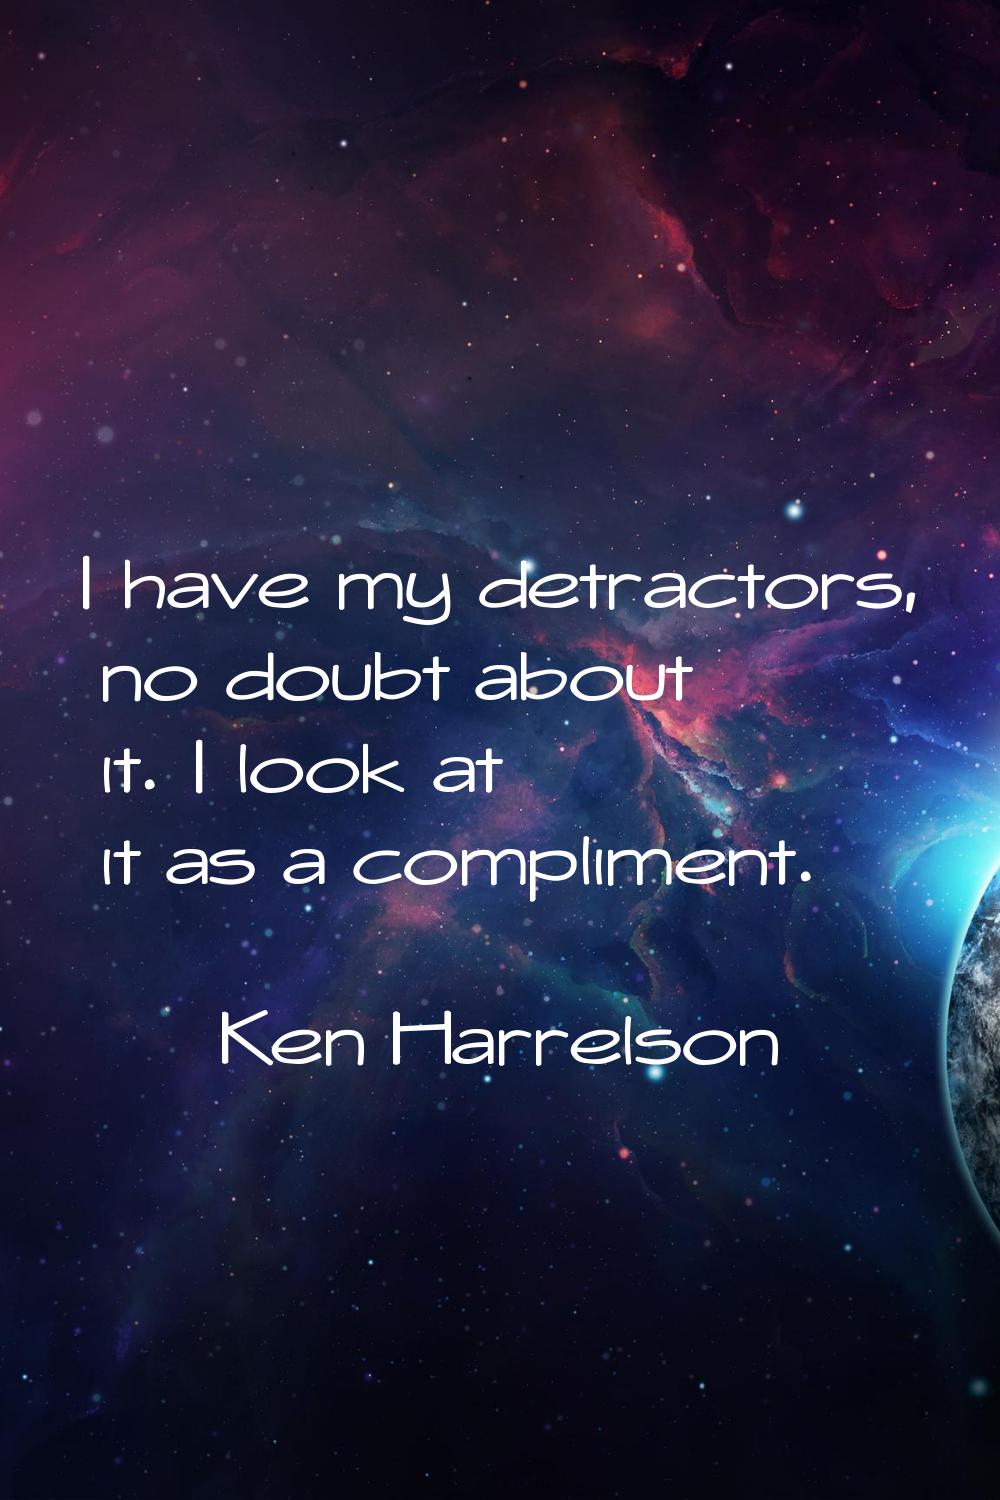 I have my detractors, no doubt about it. I look at it as a compliment.